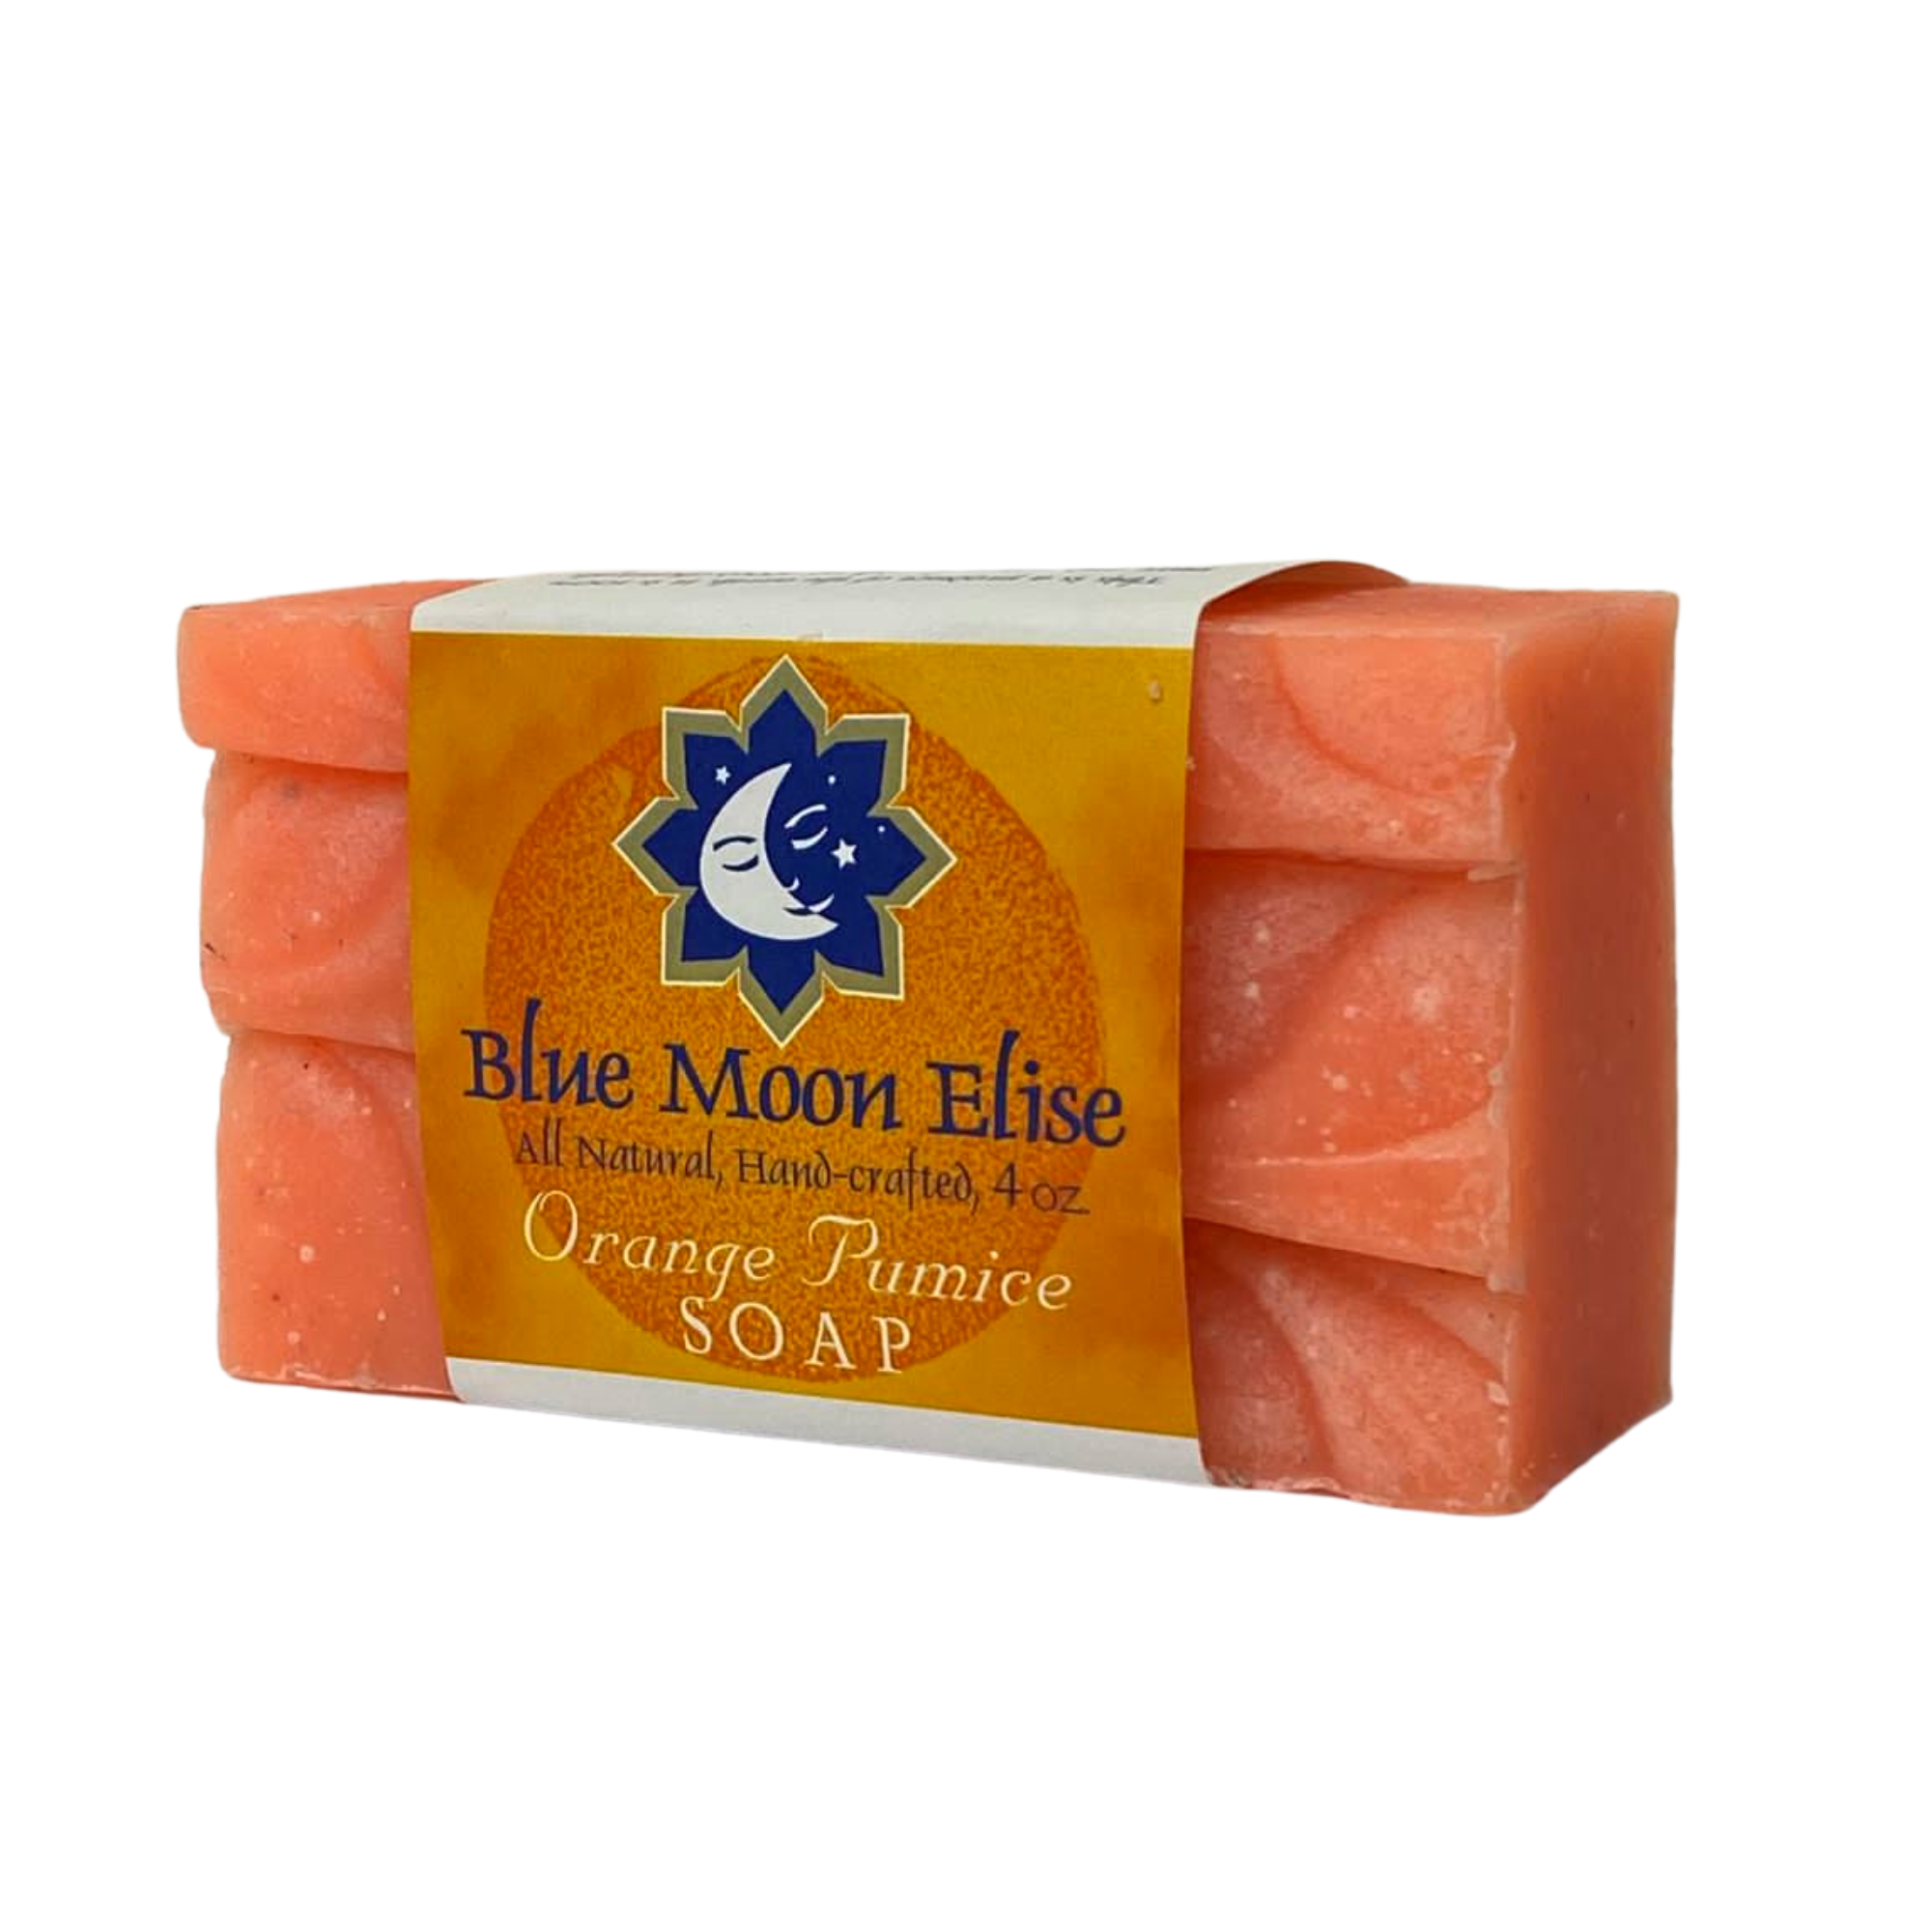 Pumice Soap/Sparkling Orange and Nutmeg — Nature's Common Scents